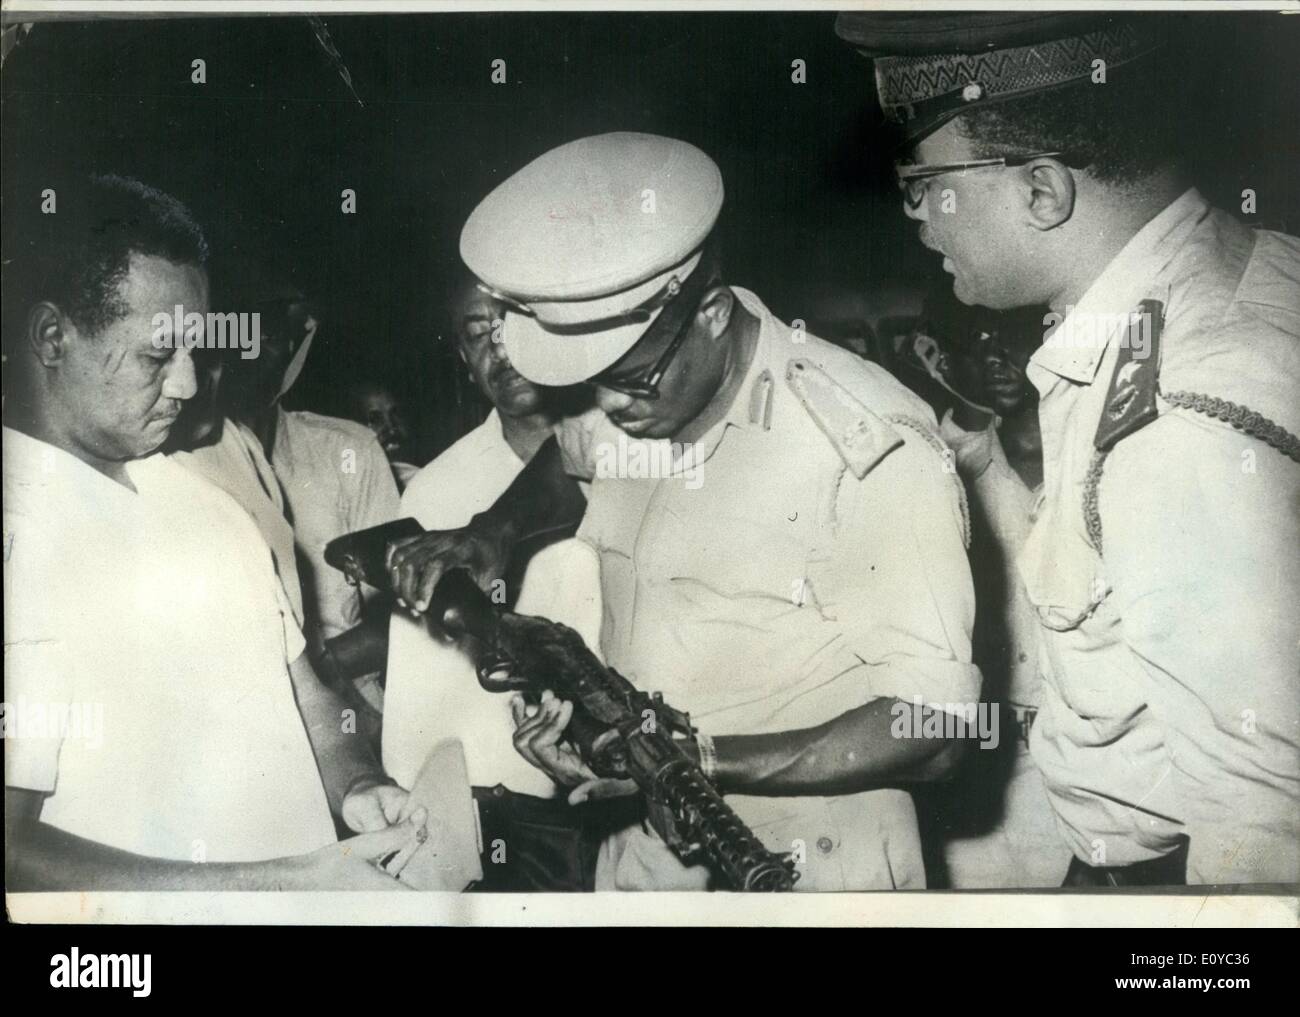 Aug. 08, 1969 - Anti-Revolution elements in Sudan: Sudanese security forces discovered massive quantities of Western-made weapons and ammunition somewhere east of Khartoum. Sudanese Interior Minister, Major Farouk Osman Hamadulla, revealed that these weapons were supposed to be used by anit revolution elements against the Revolution Regime. Among the weapons discovered were 244 guns, a number of hand grenades and a quantity of explosives Stock Photo